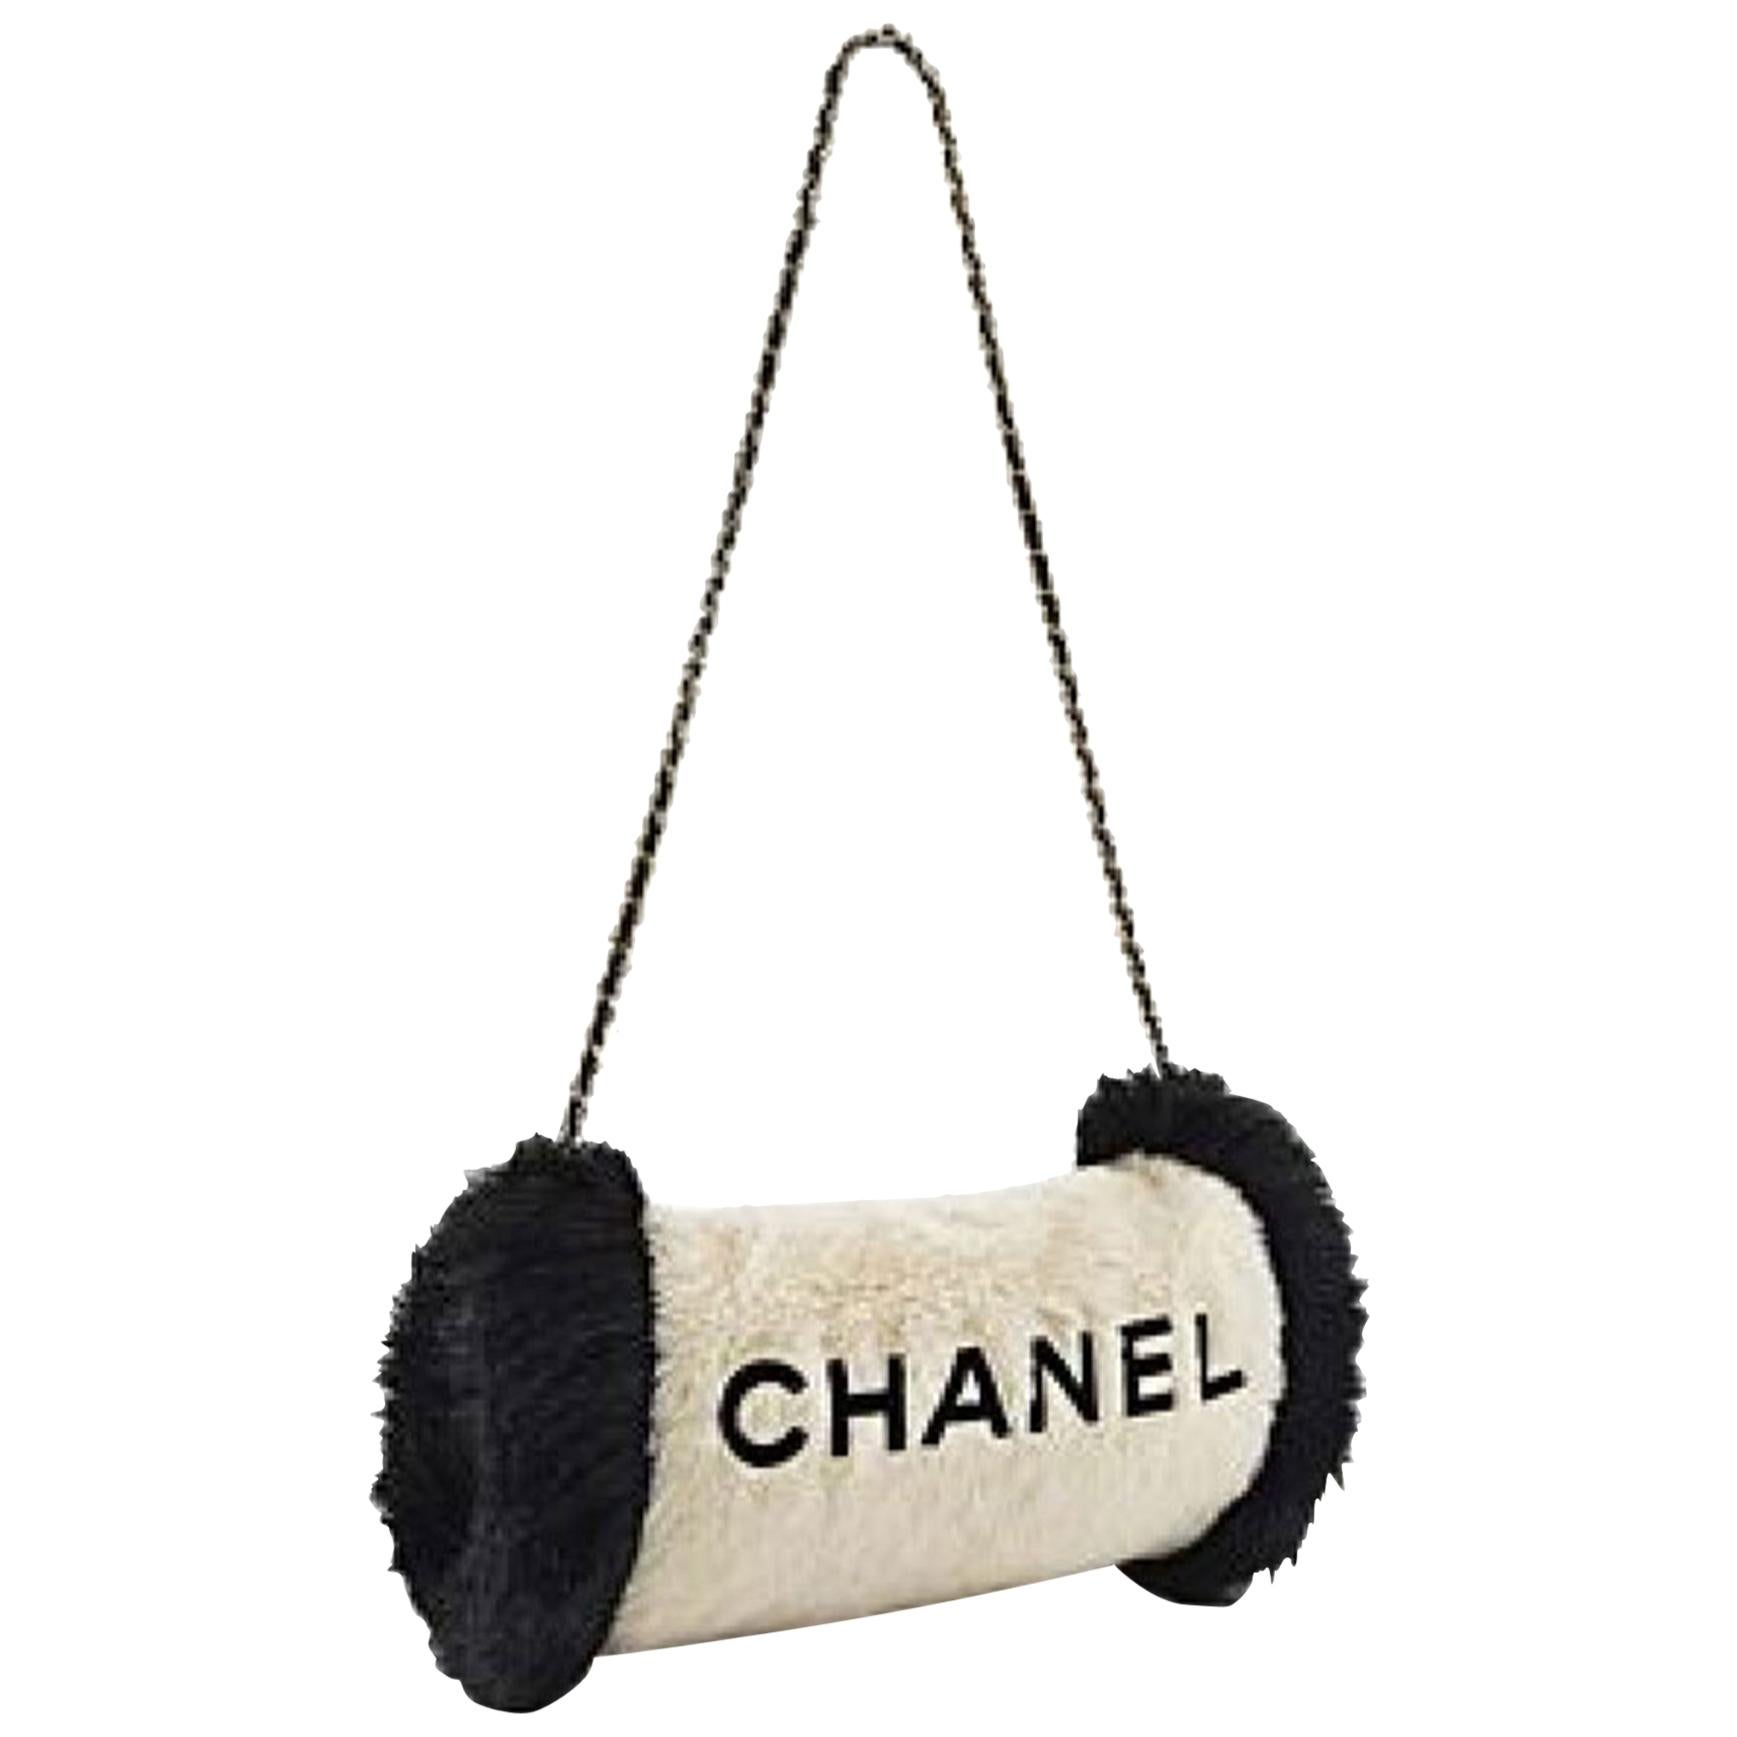 Chanel Logos Hand Warmer with Chain Strap Muff White Faux Fur Cross Body Bag For Sale